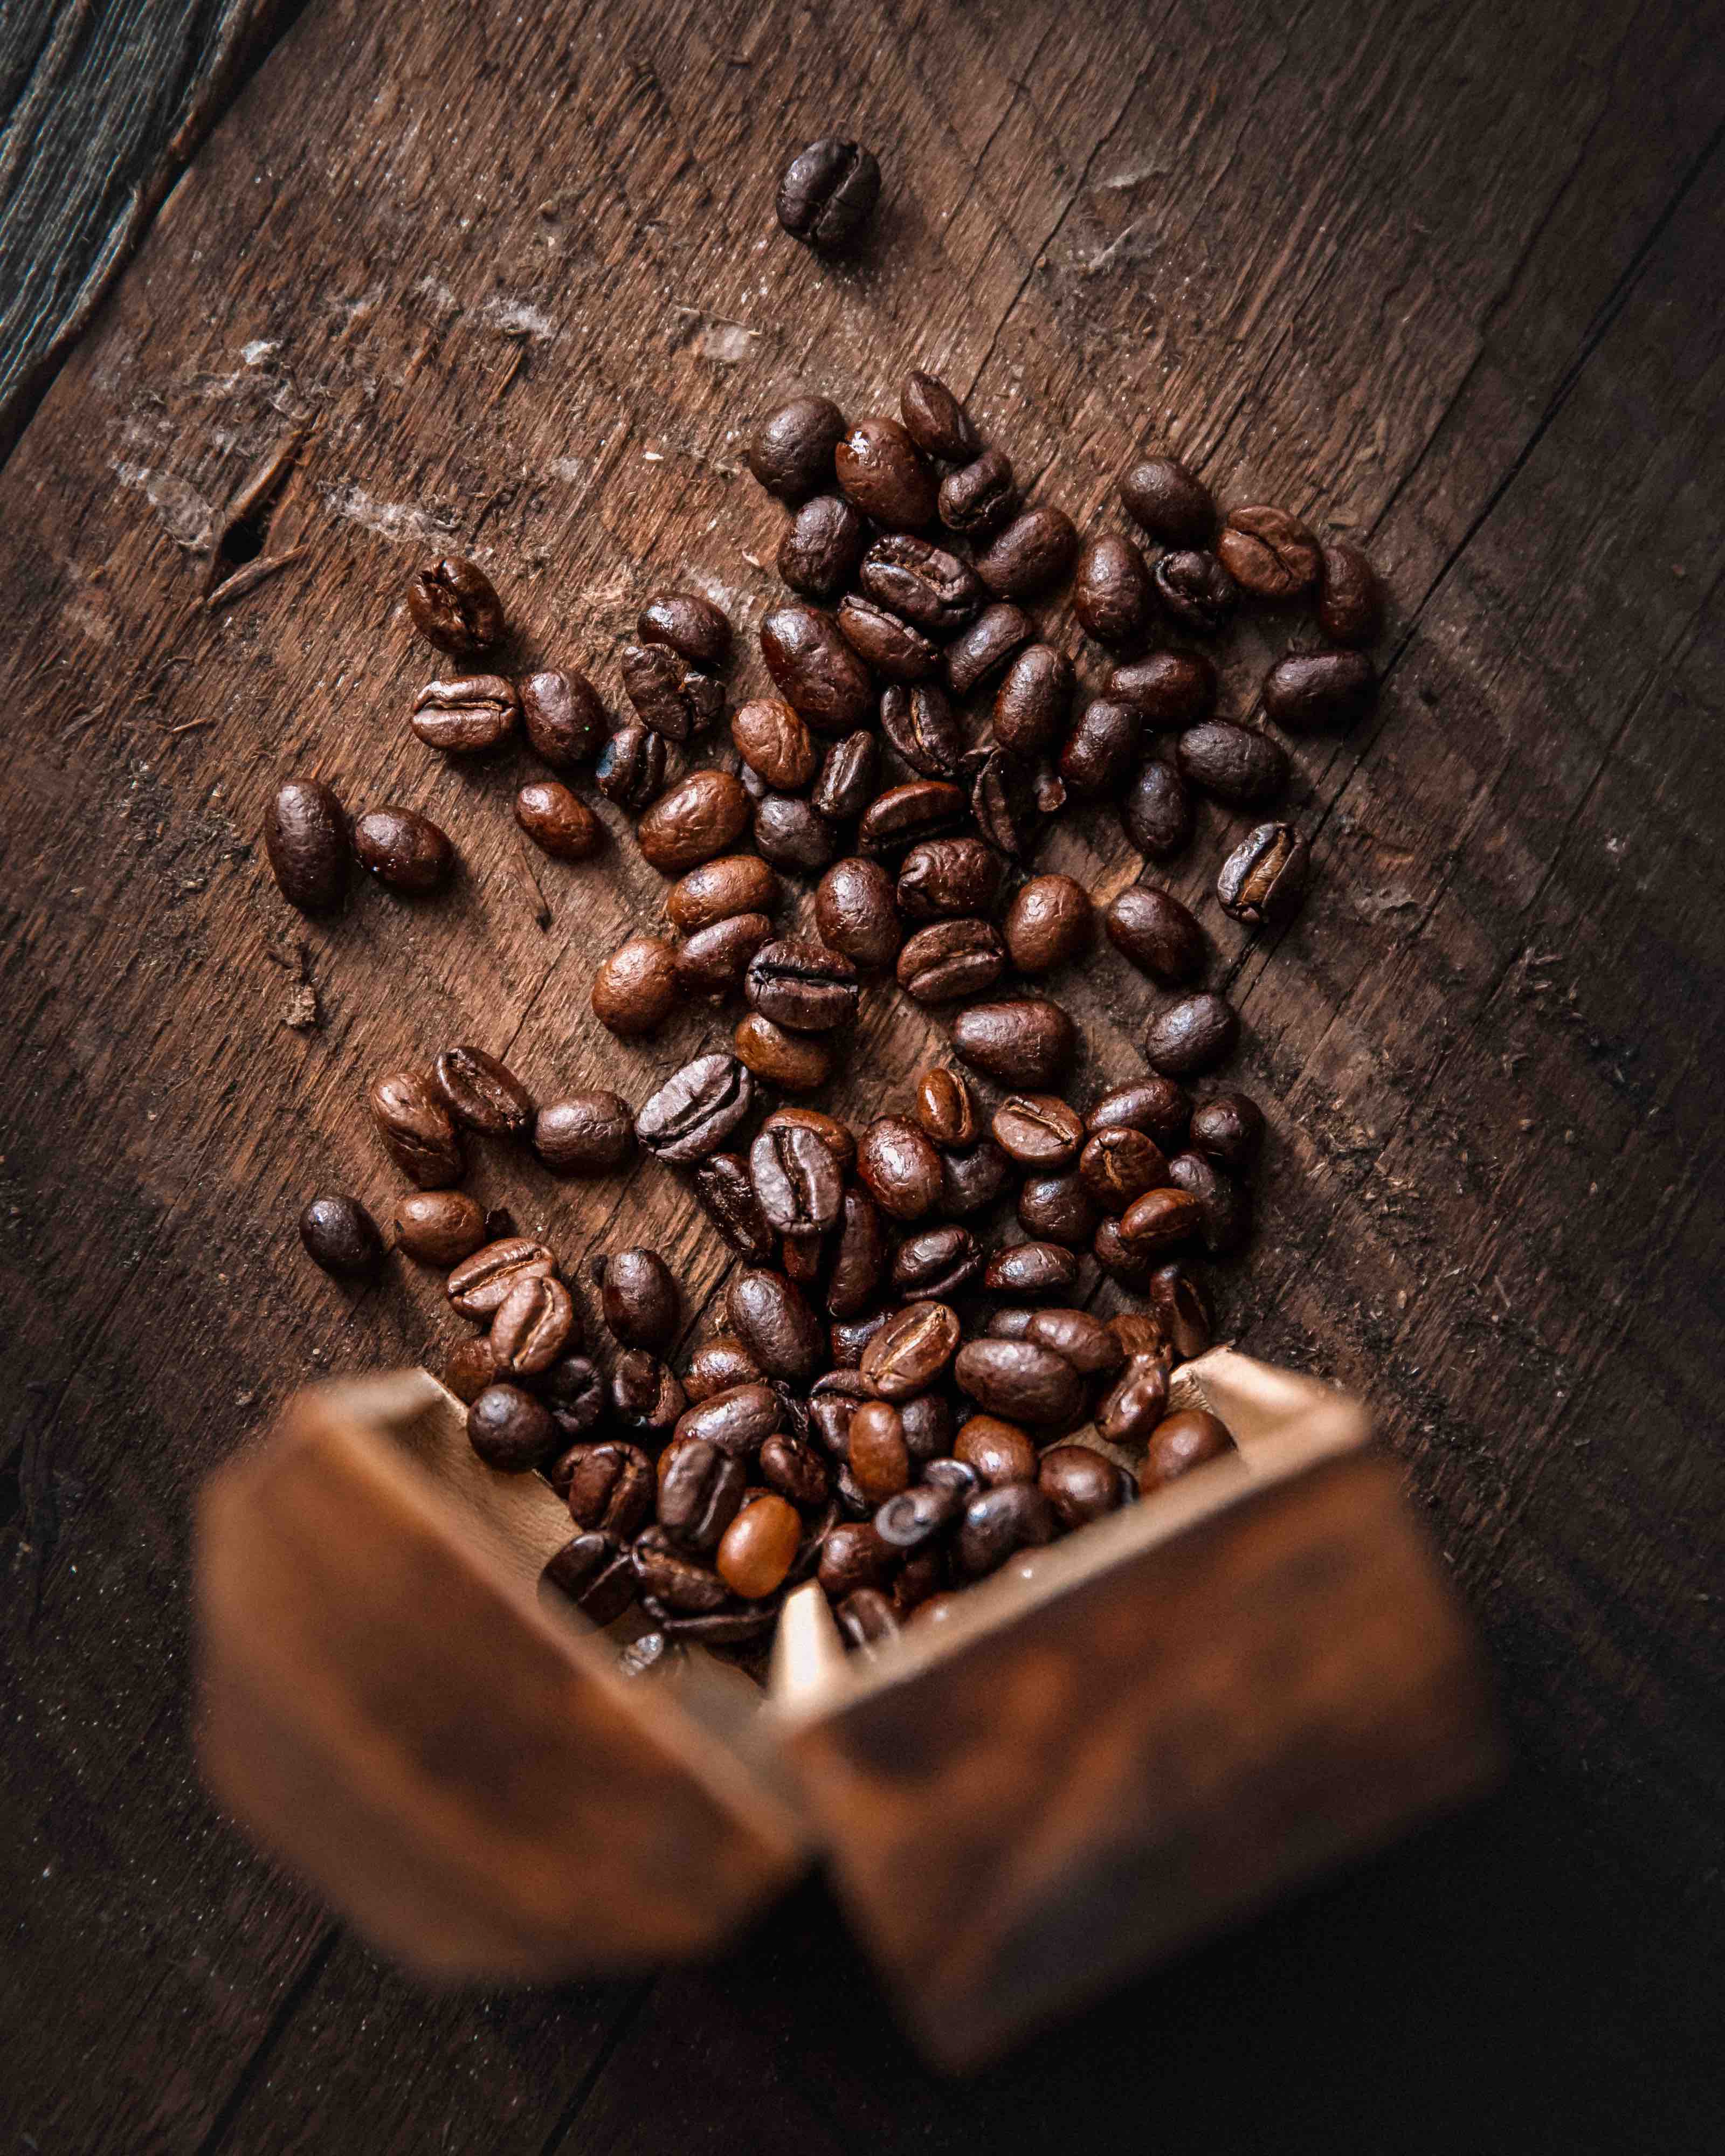 Overhead image of coffee spilling onto a wooden tabletop.